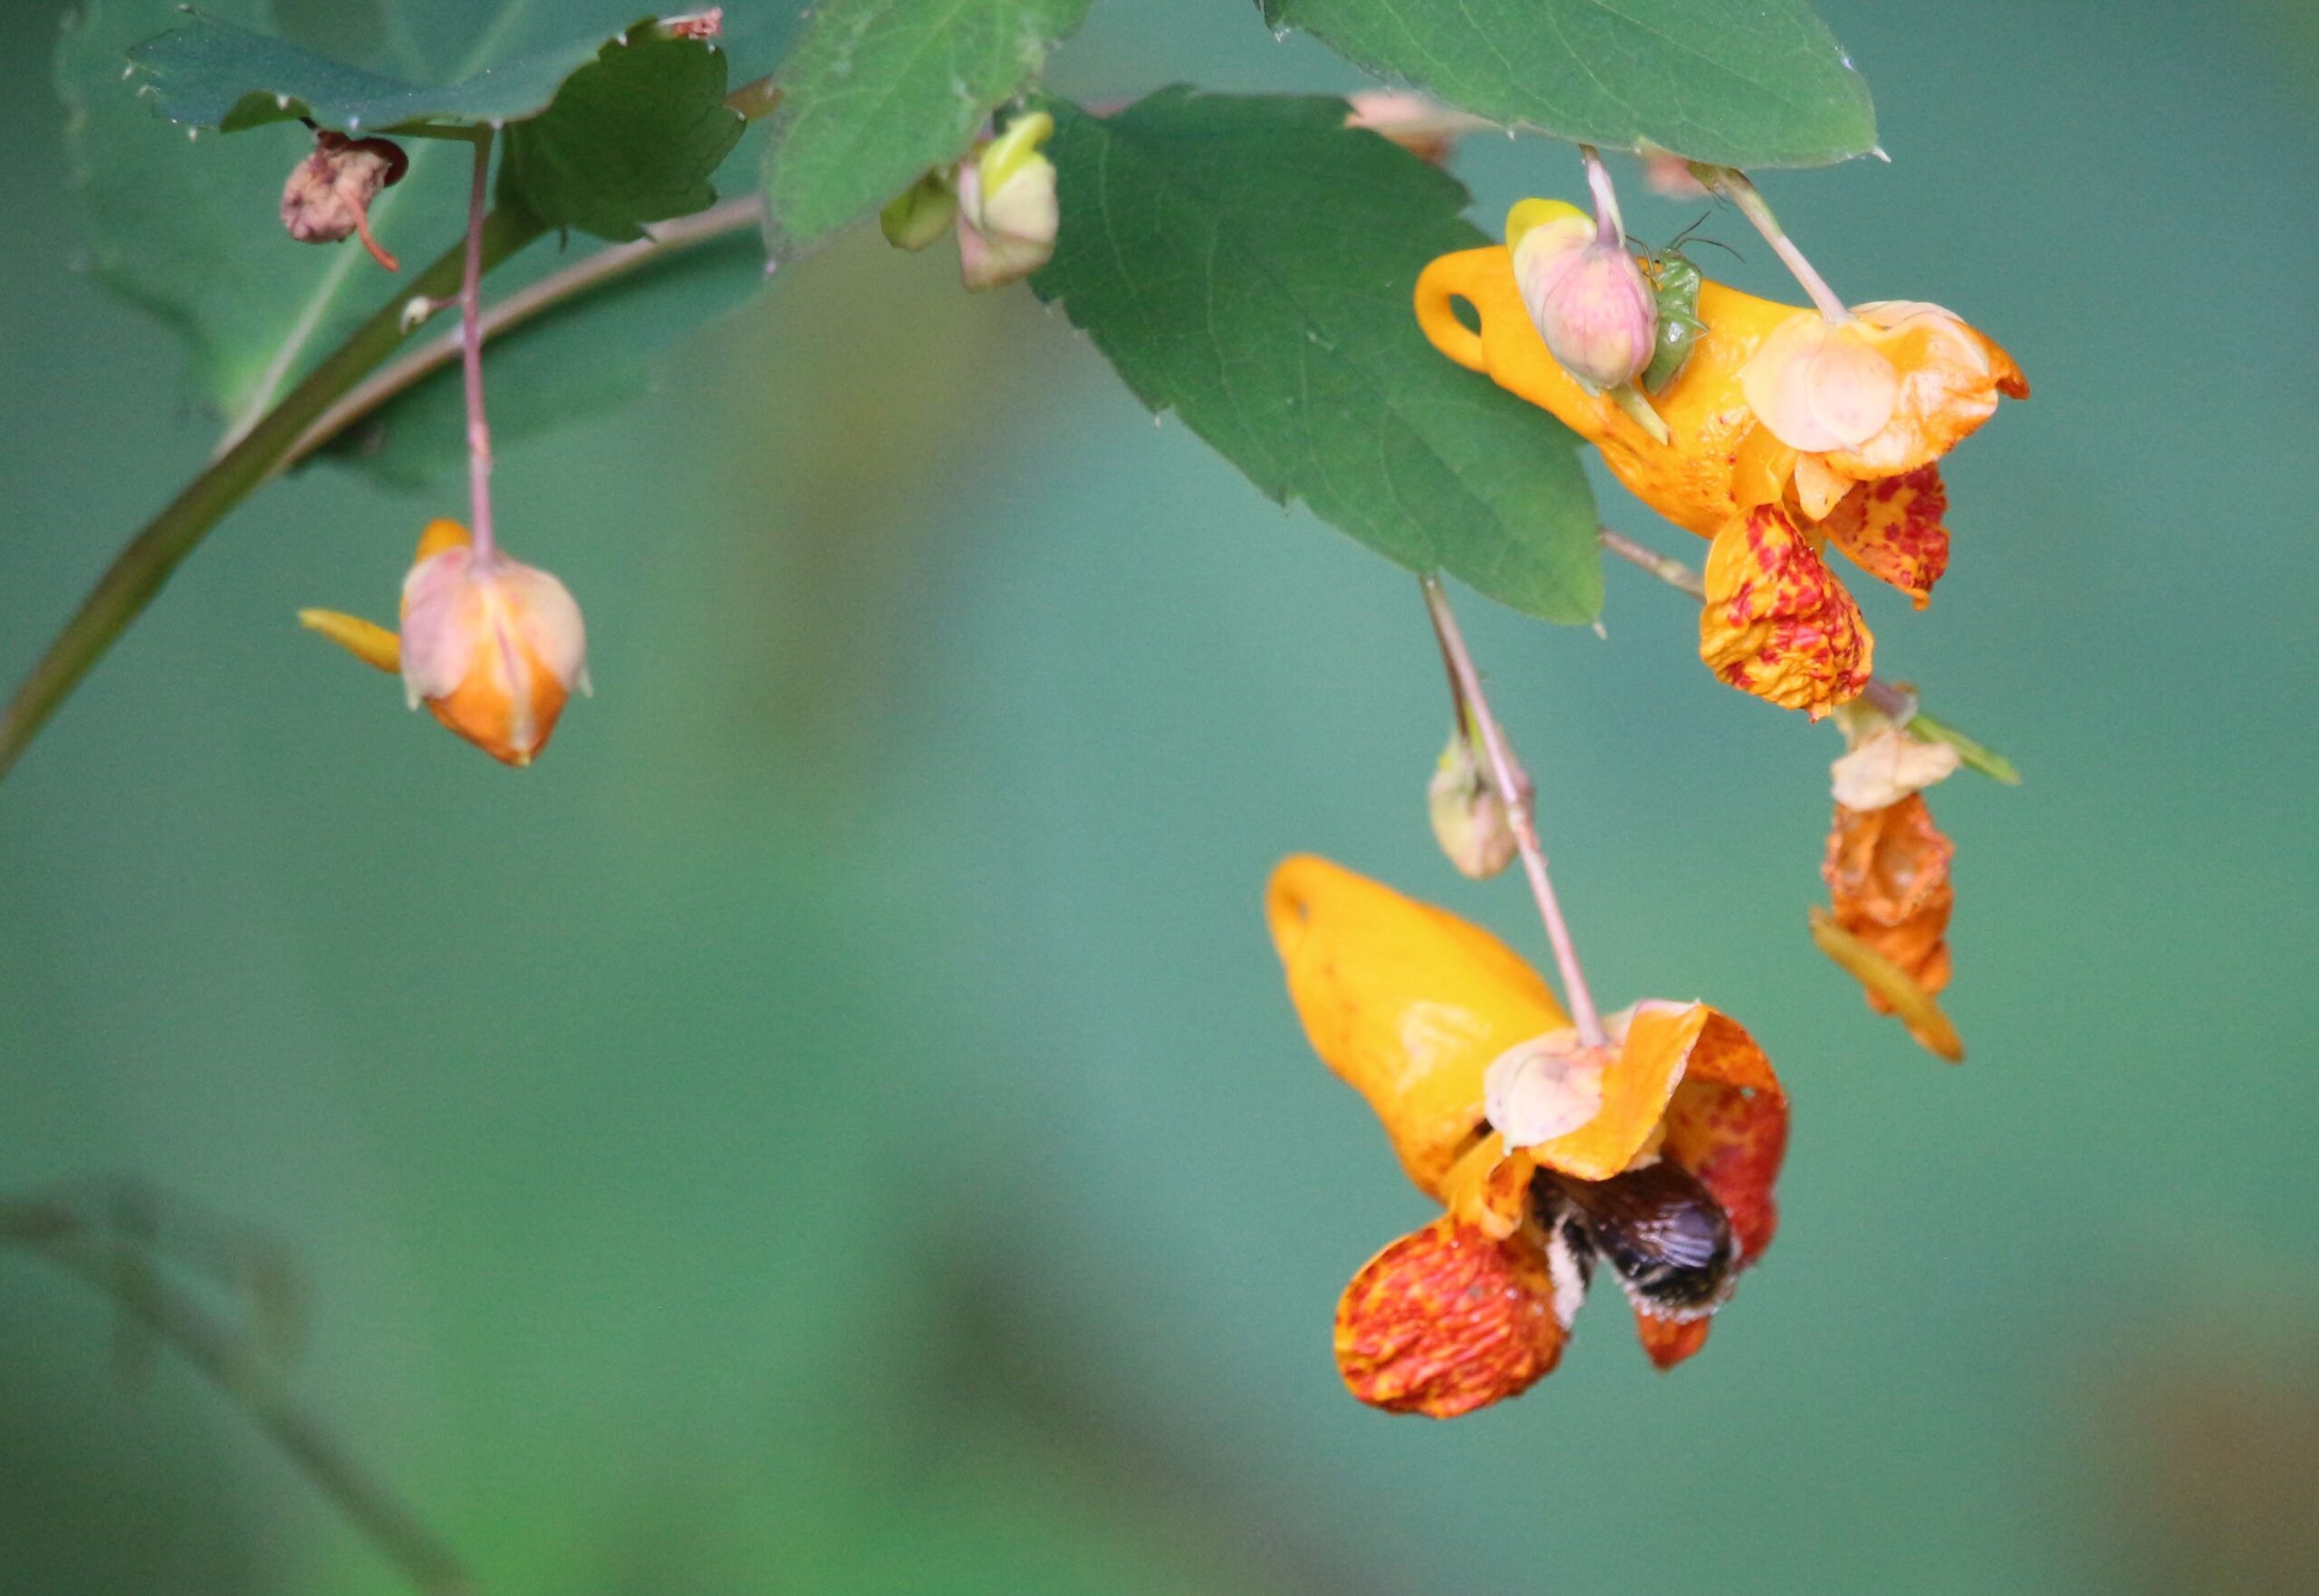 Image of A cluster of jewelweed pods